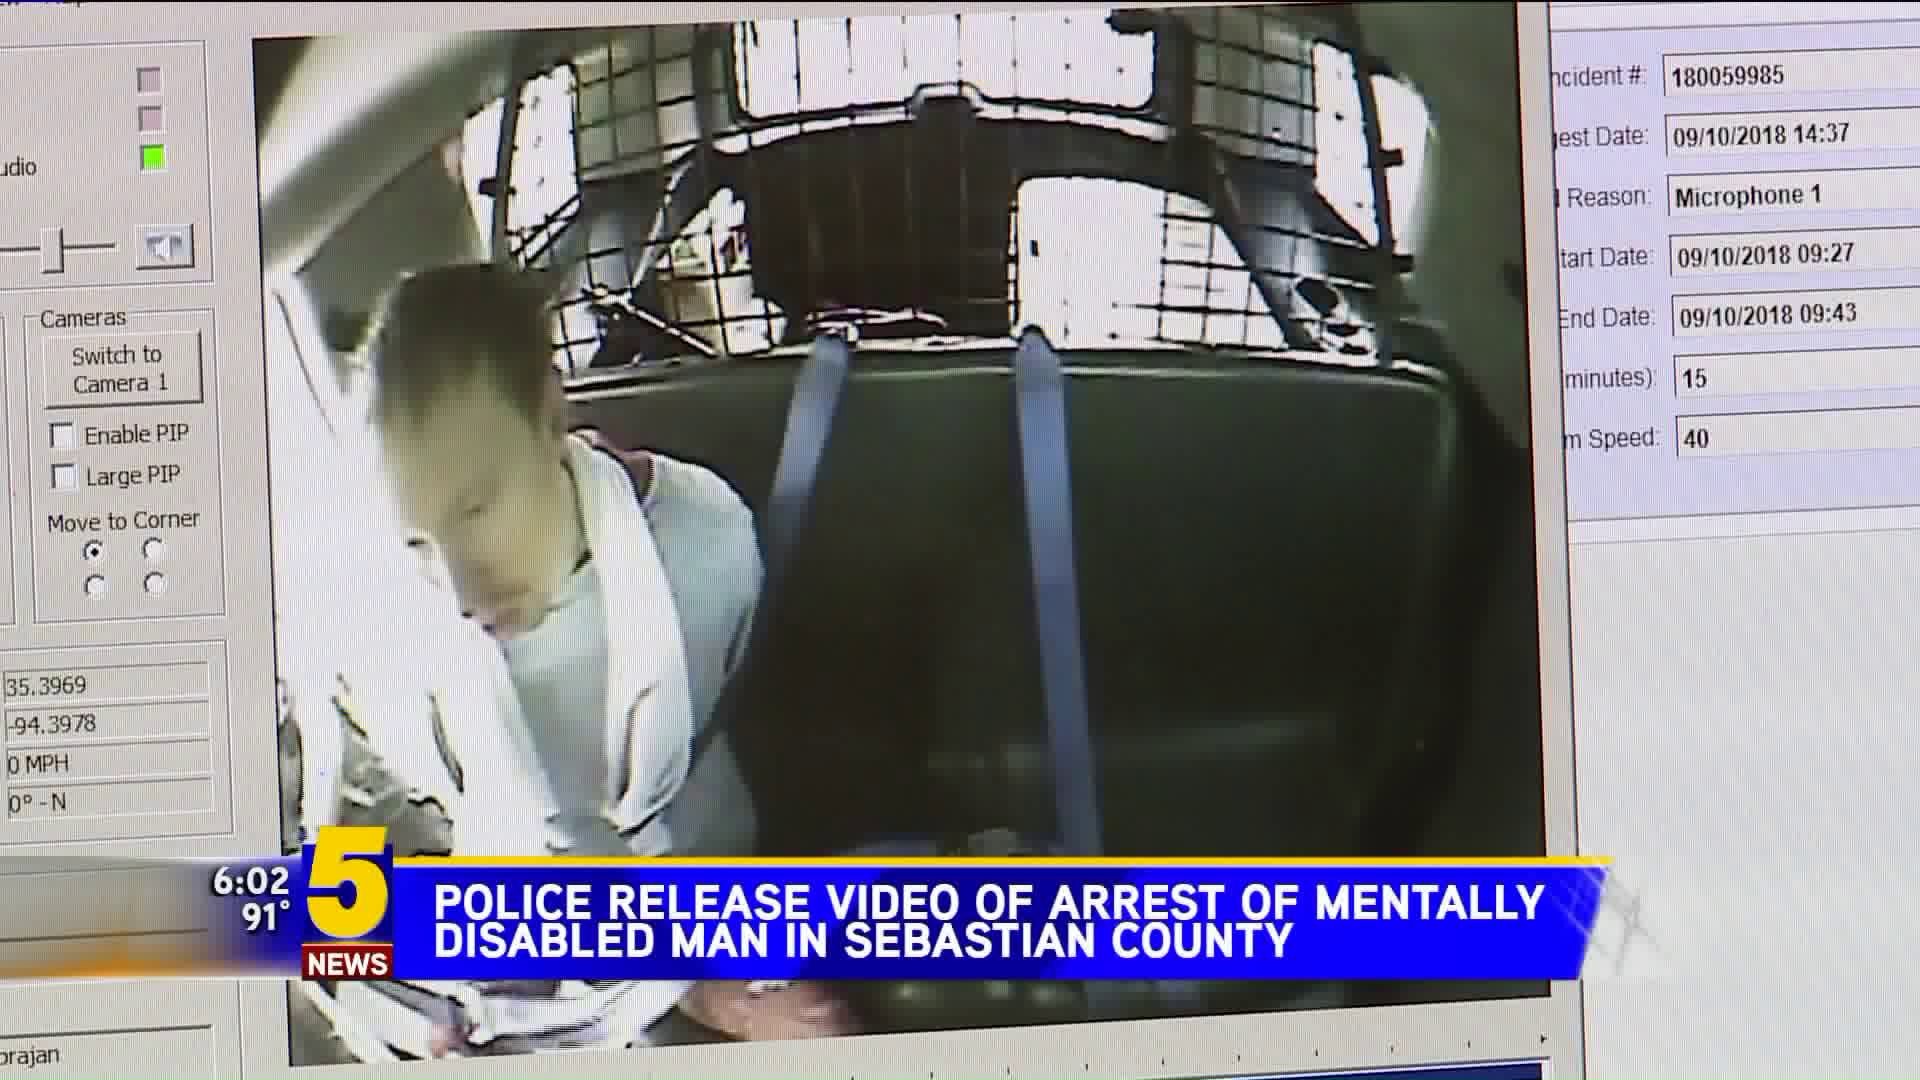 Police Release Video Of Arrest Of Mentally Disabled Man In Sebastian County